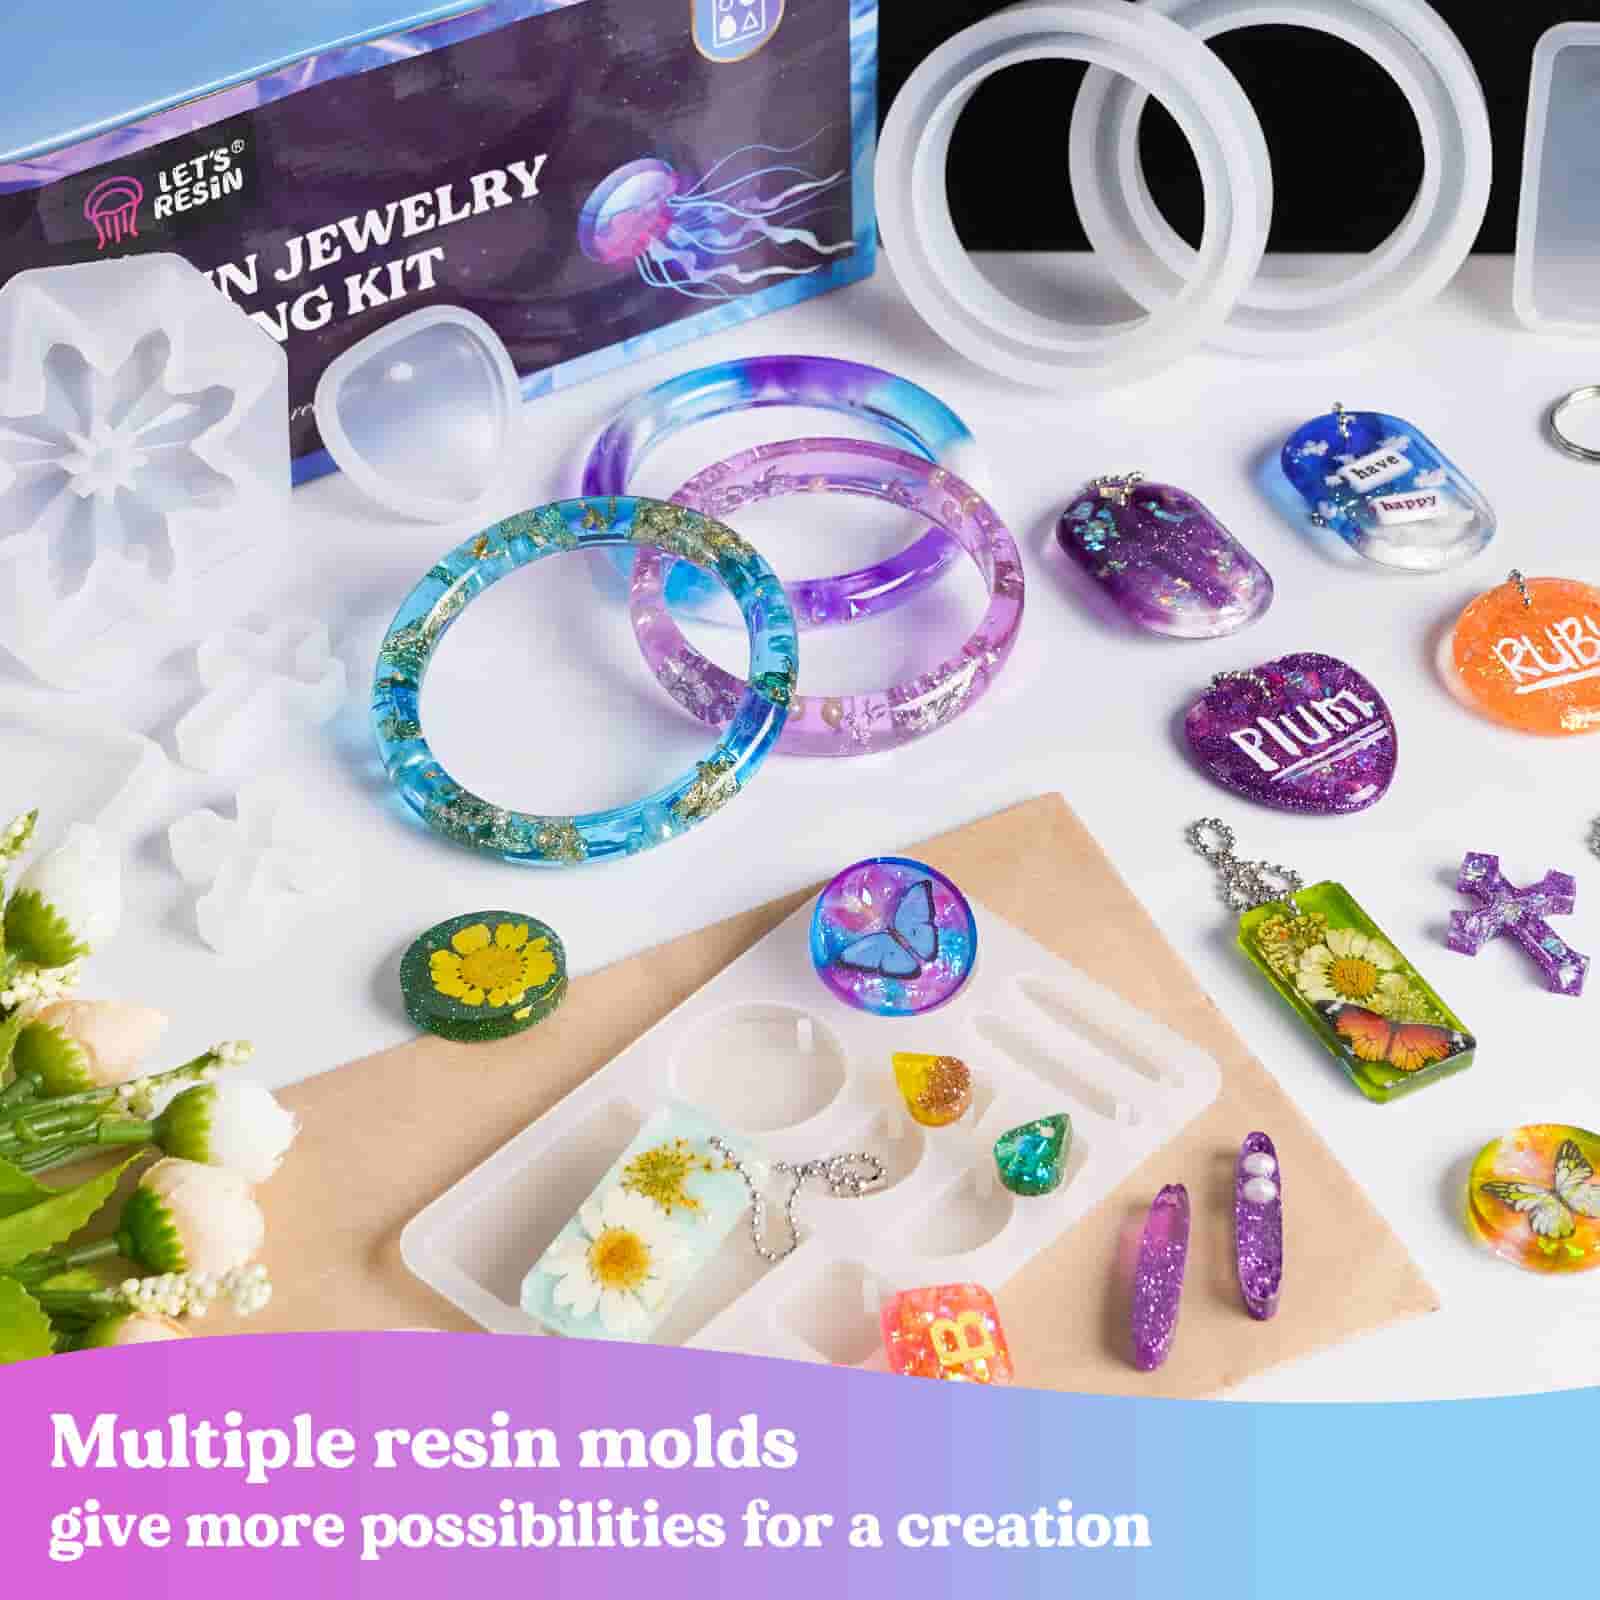 Buy LET'S RESIN 198PCS Resin Jewelry Molds, with 8 Pairs Earring